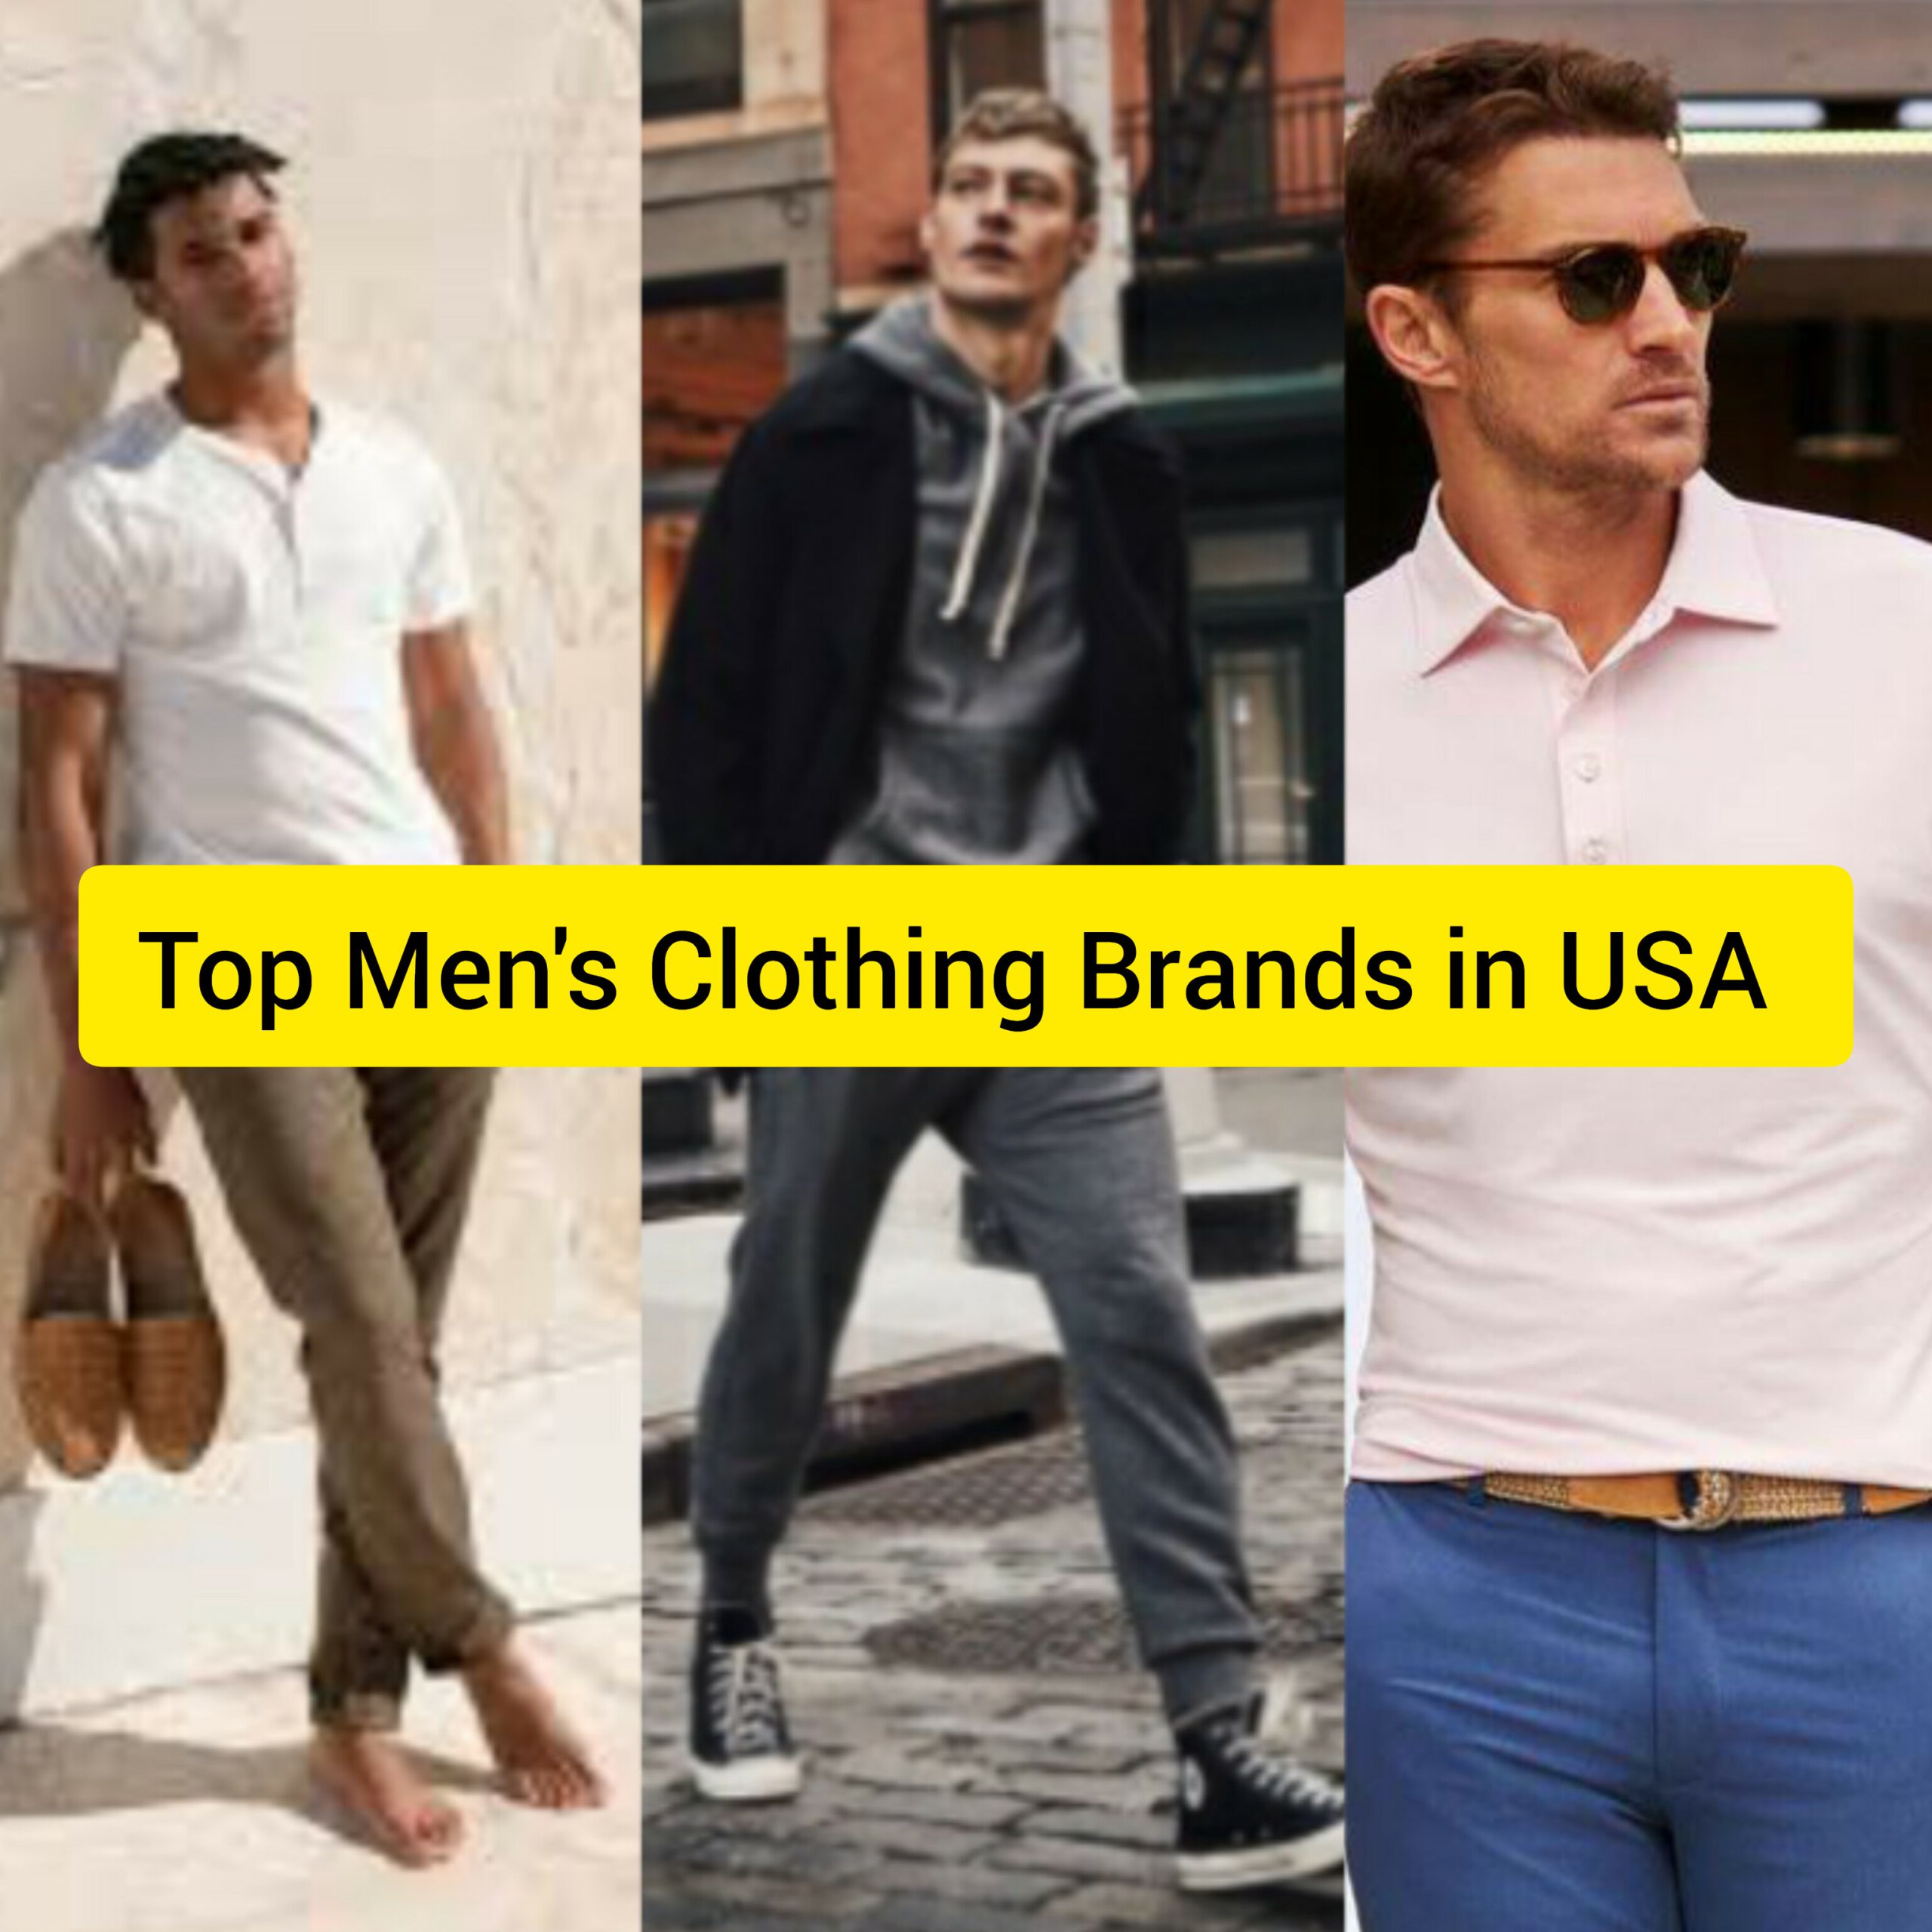 TOP 10 CLOTHING BRANDS FOR MEN IN USA